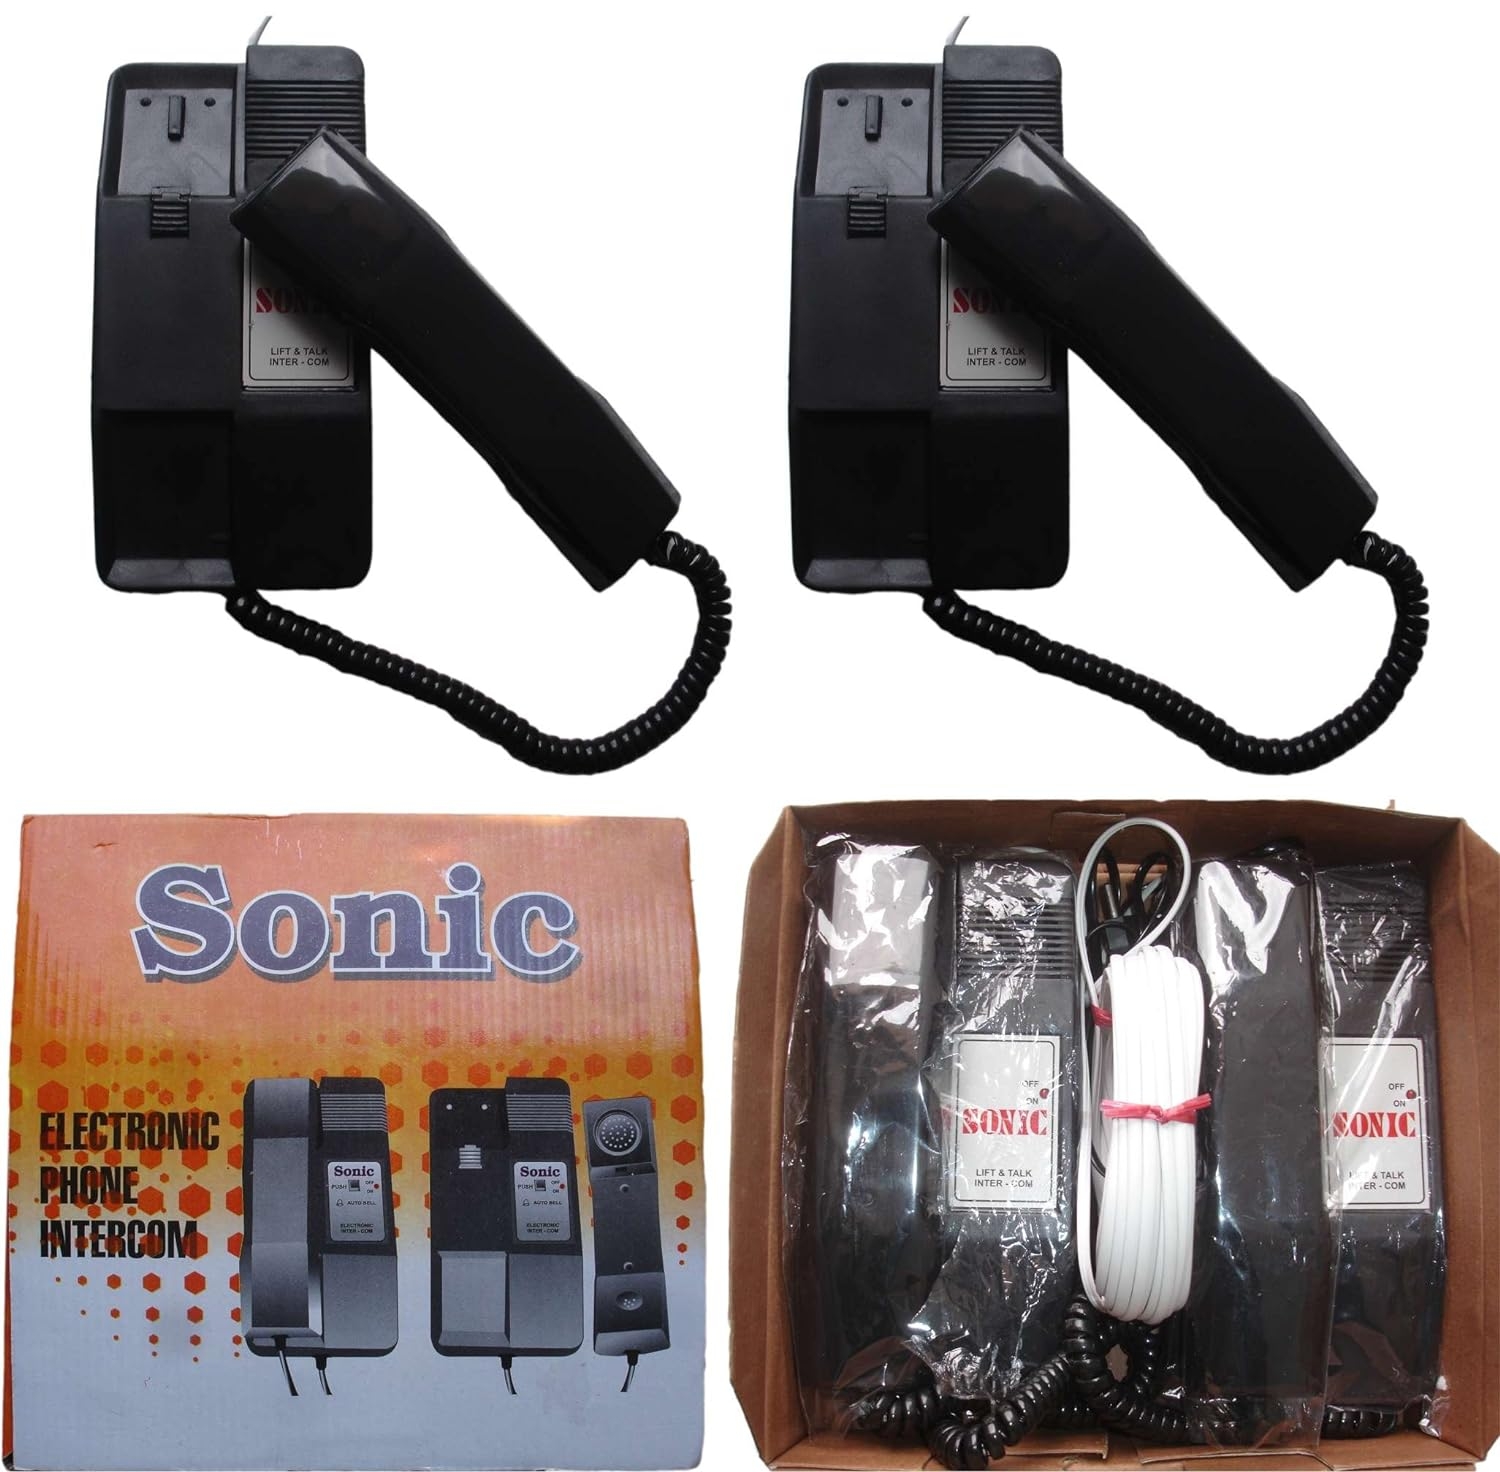 Sonic Intercom System with 2 Phones | Corded